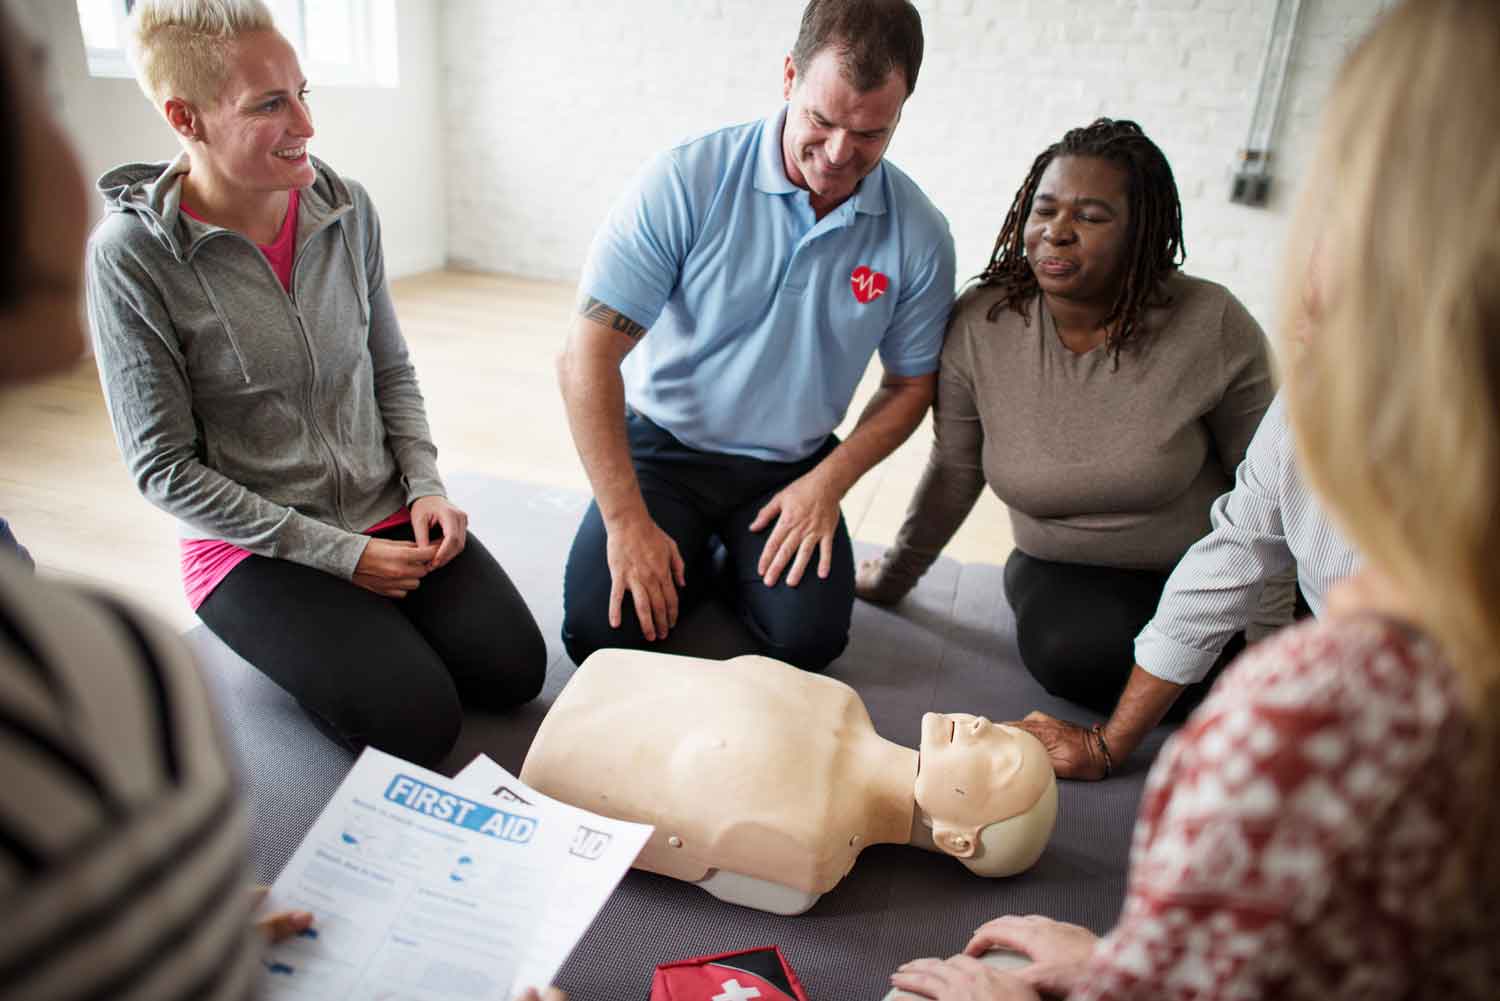 CPR Training and Certification with KMS Medical